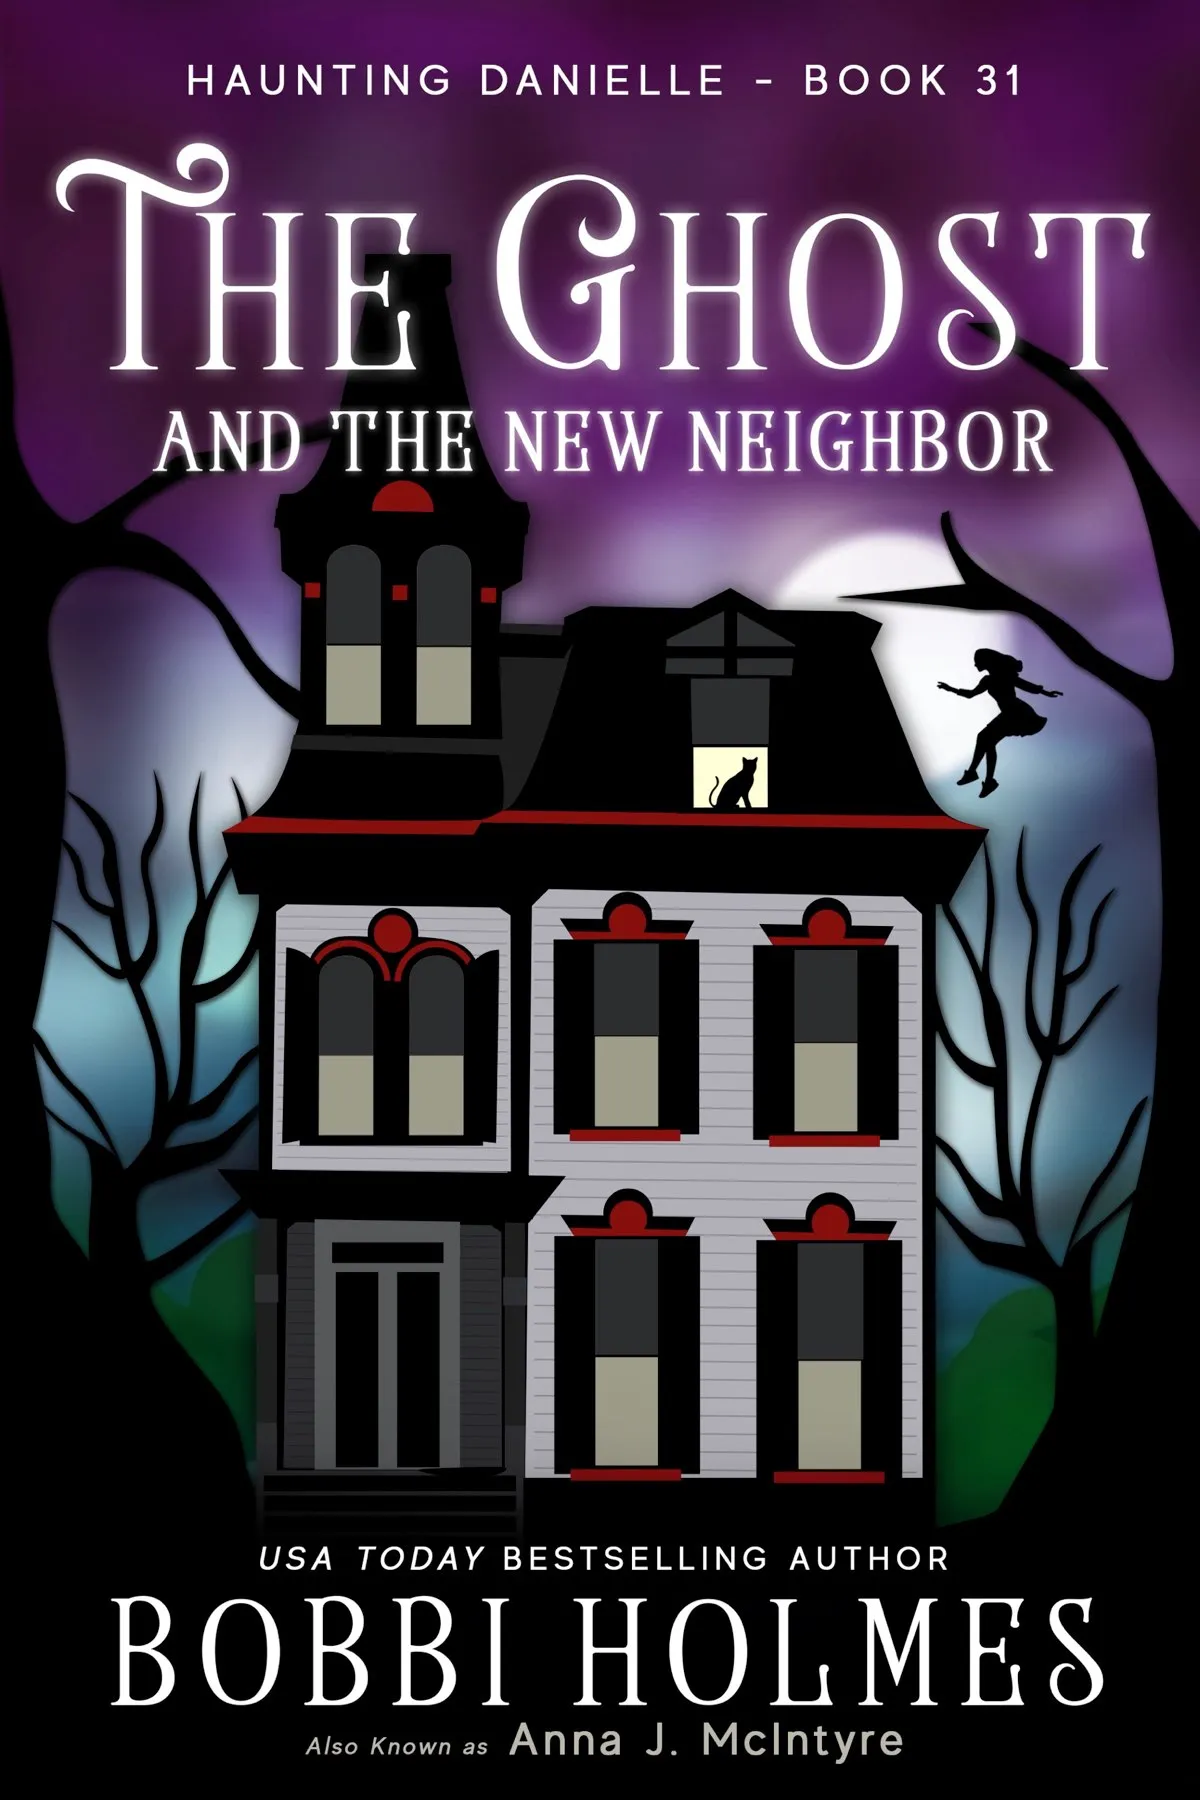 The Ghost and the New Neighbor (Haunting Danielle #31)